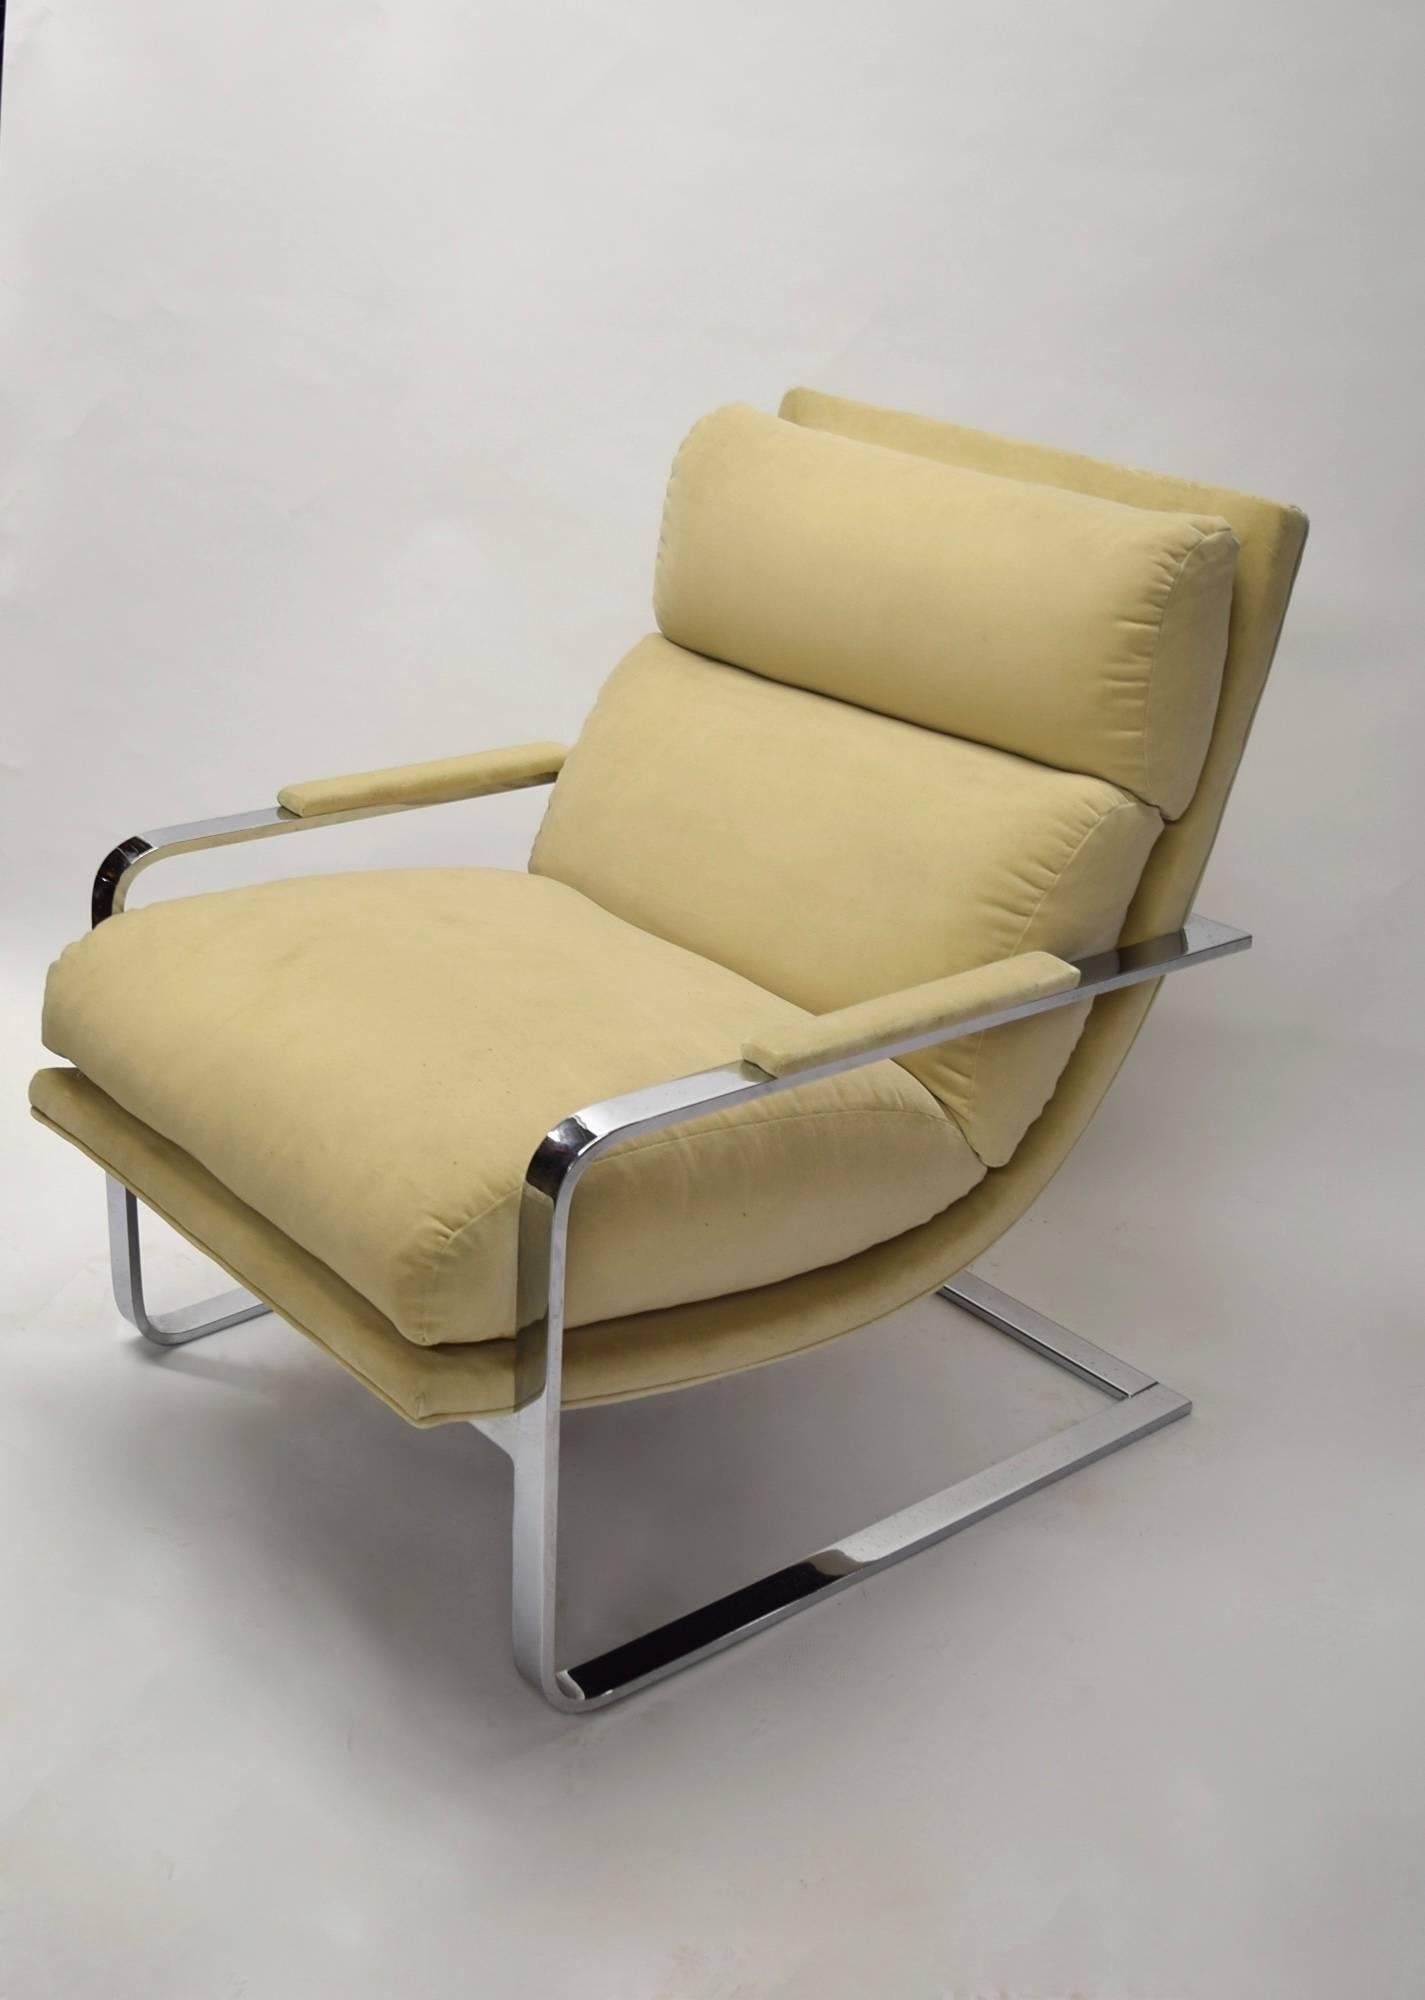 Mid-Century Modern Lounge Chair by Milo Baughman for Thayer Coggin, circa 1975 Made in USA